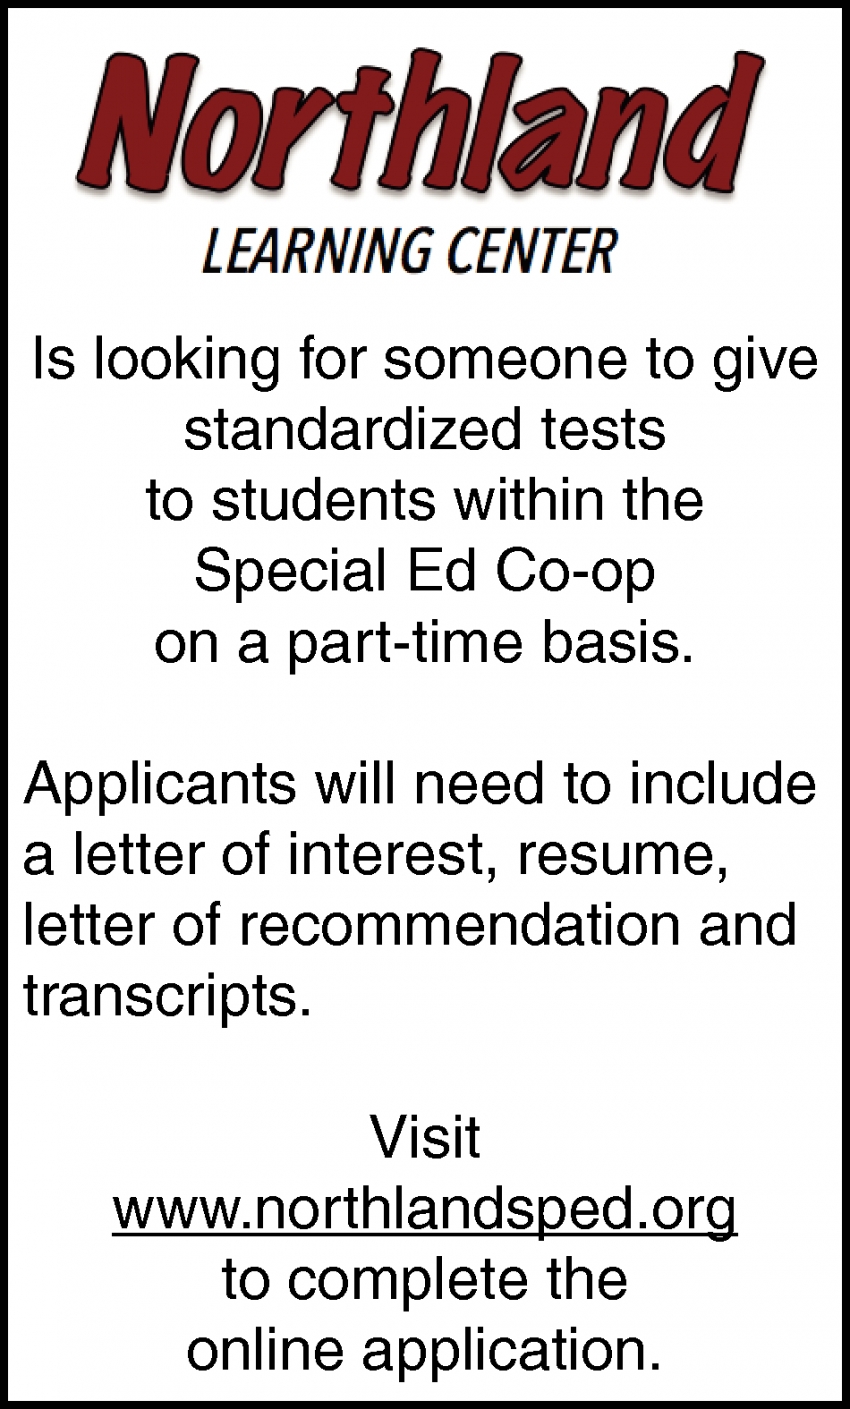 Looking for Someone to Give Standarized Tests to Students Whitin the Special Ed Co-Op 